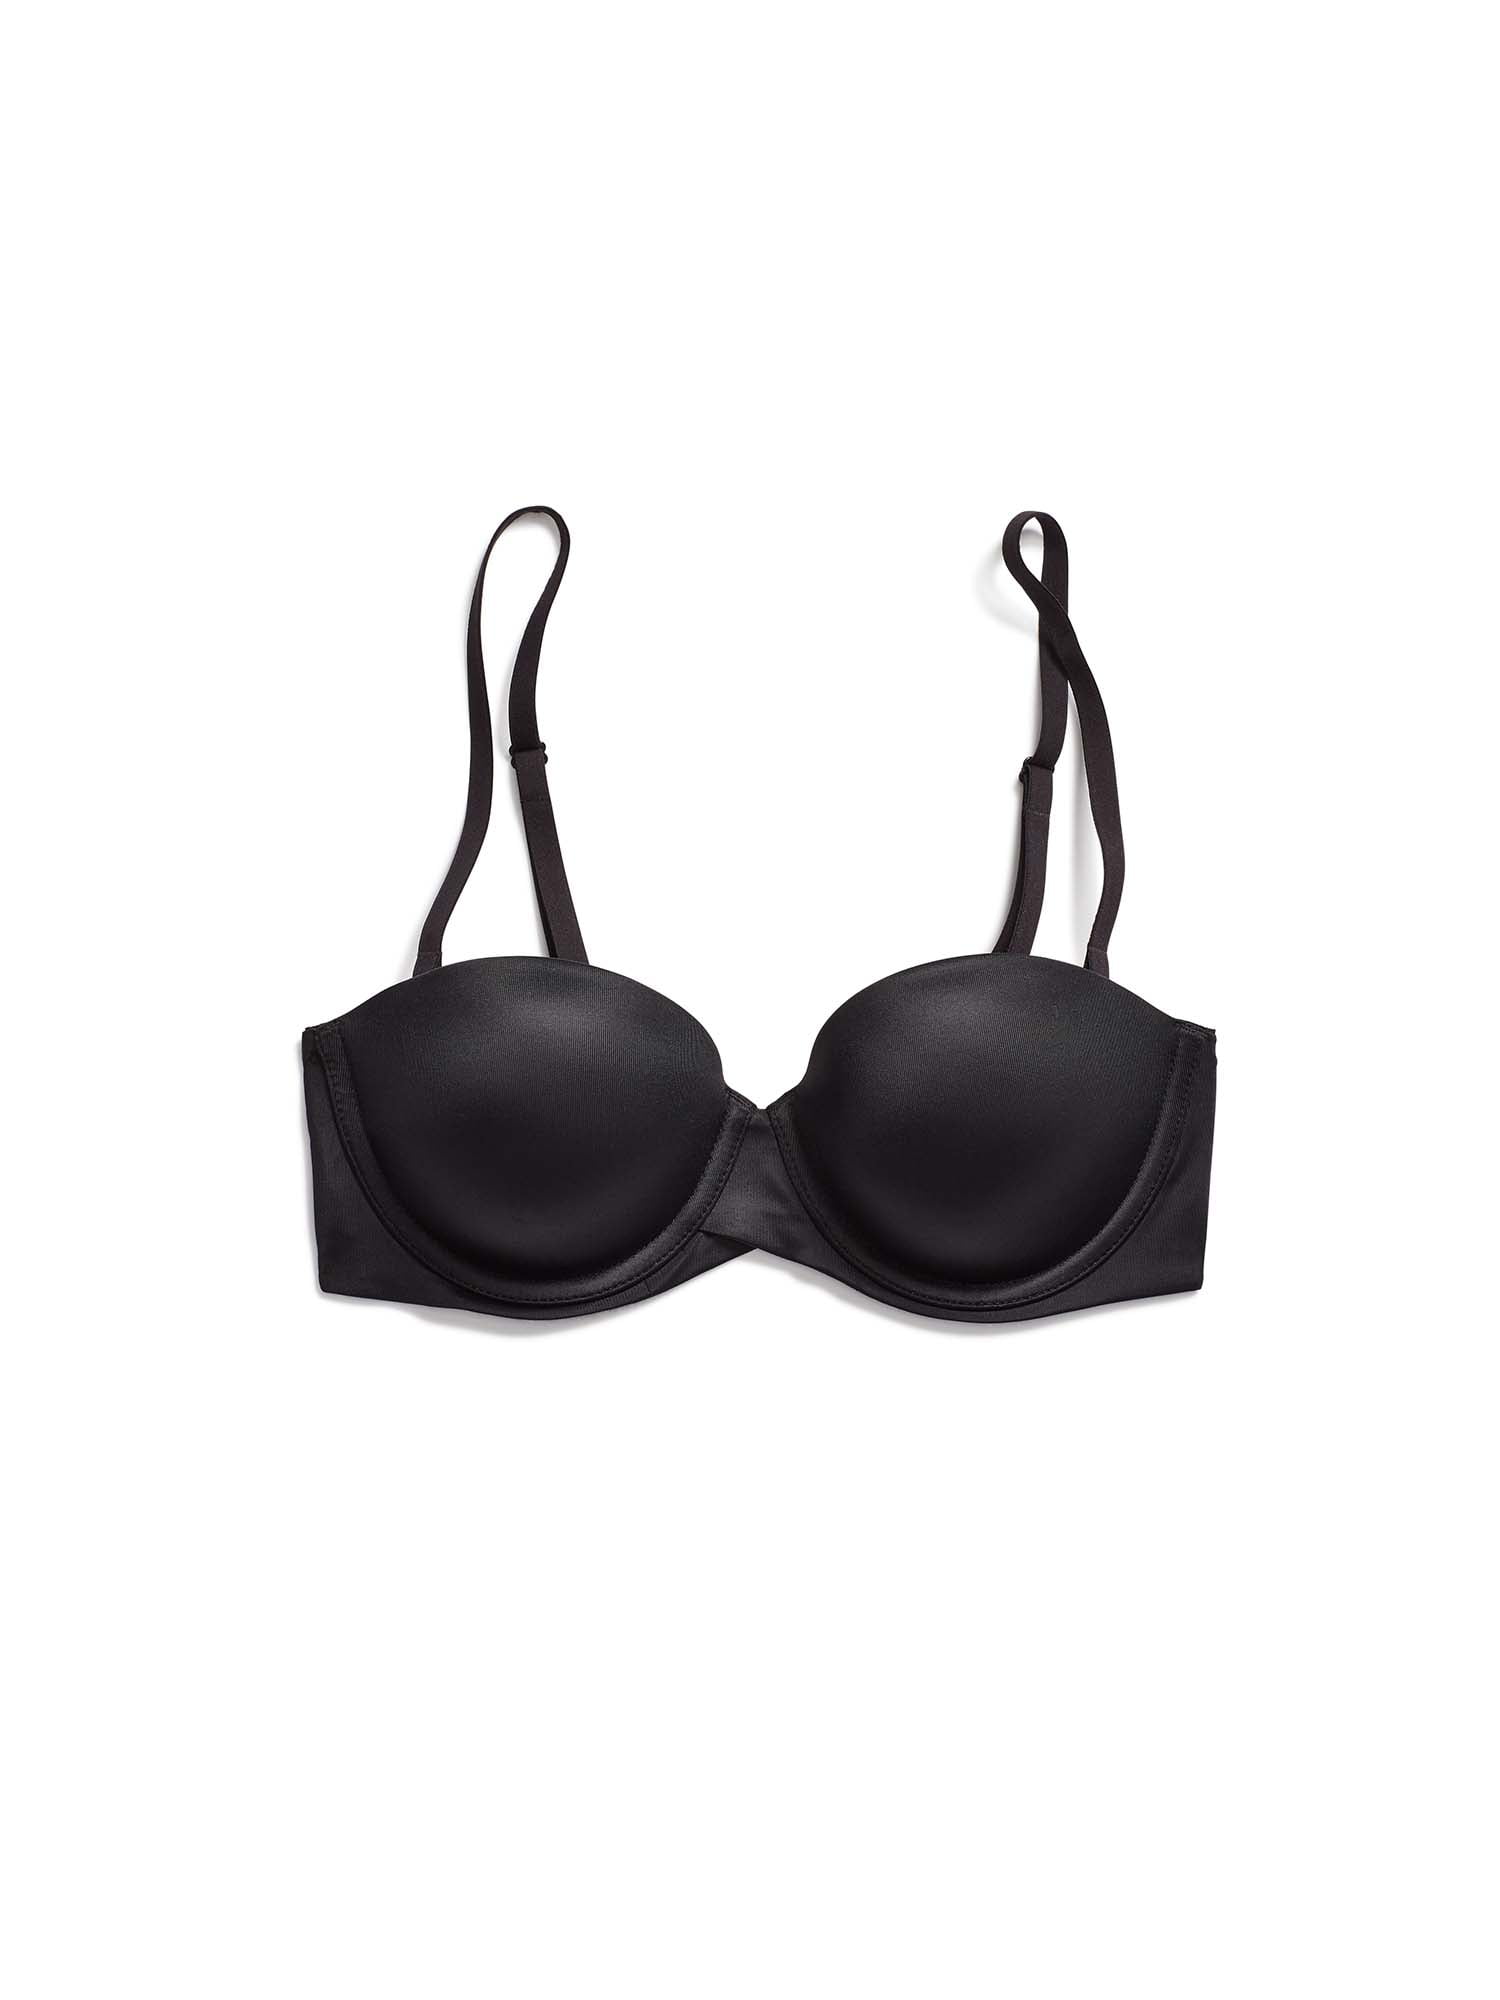 Amafuur Push Up Strapless Bra with Clear Straps Multiway Super Padded Add 2  Cup Support Underwire Lace Demi Bras Black 34C